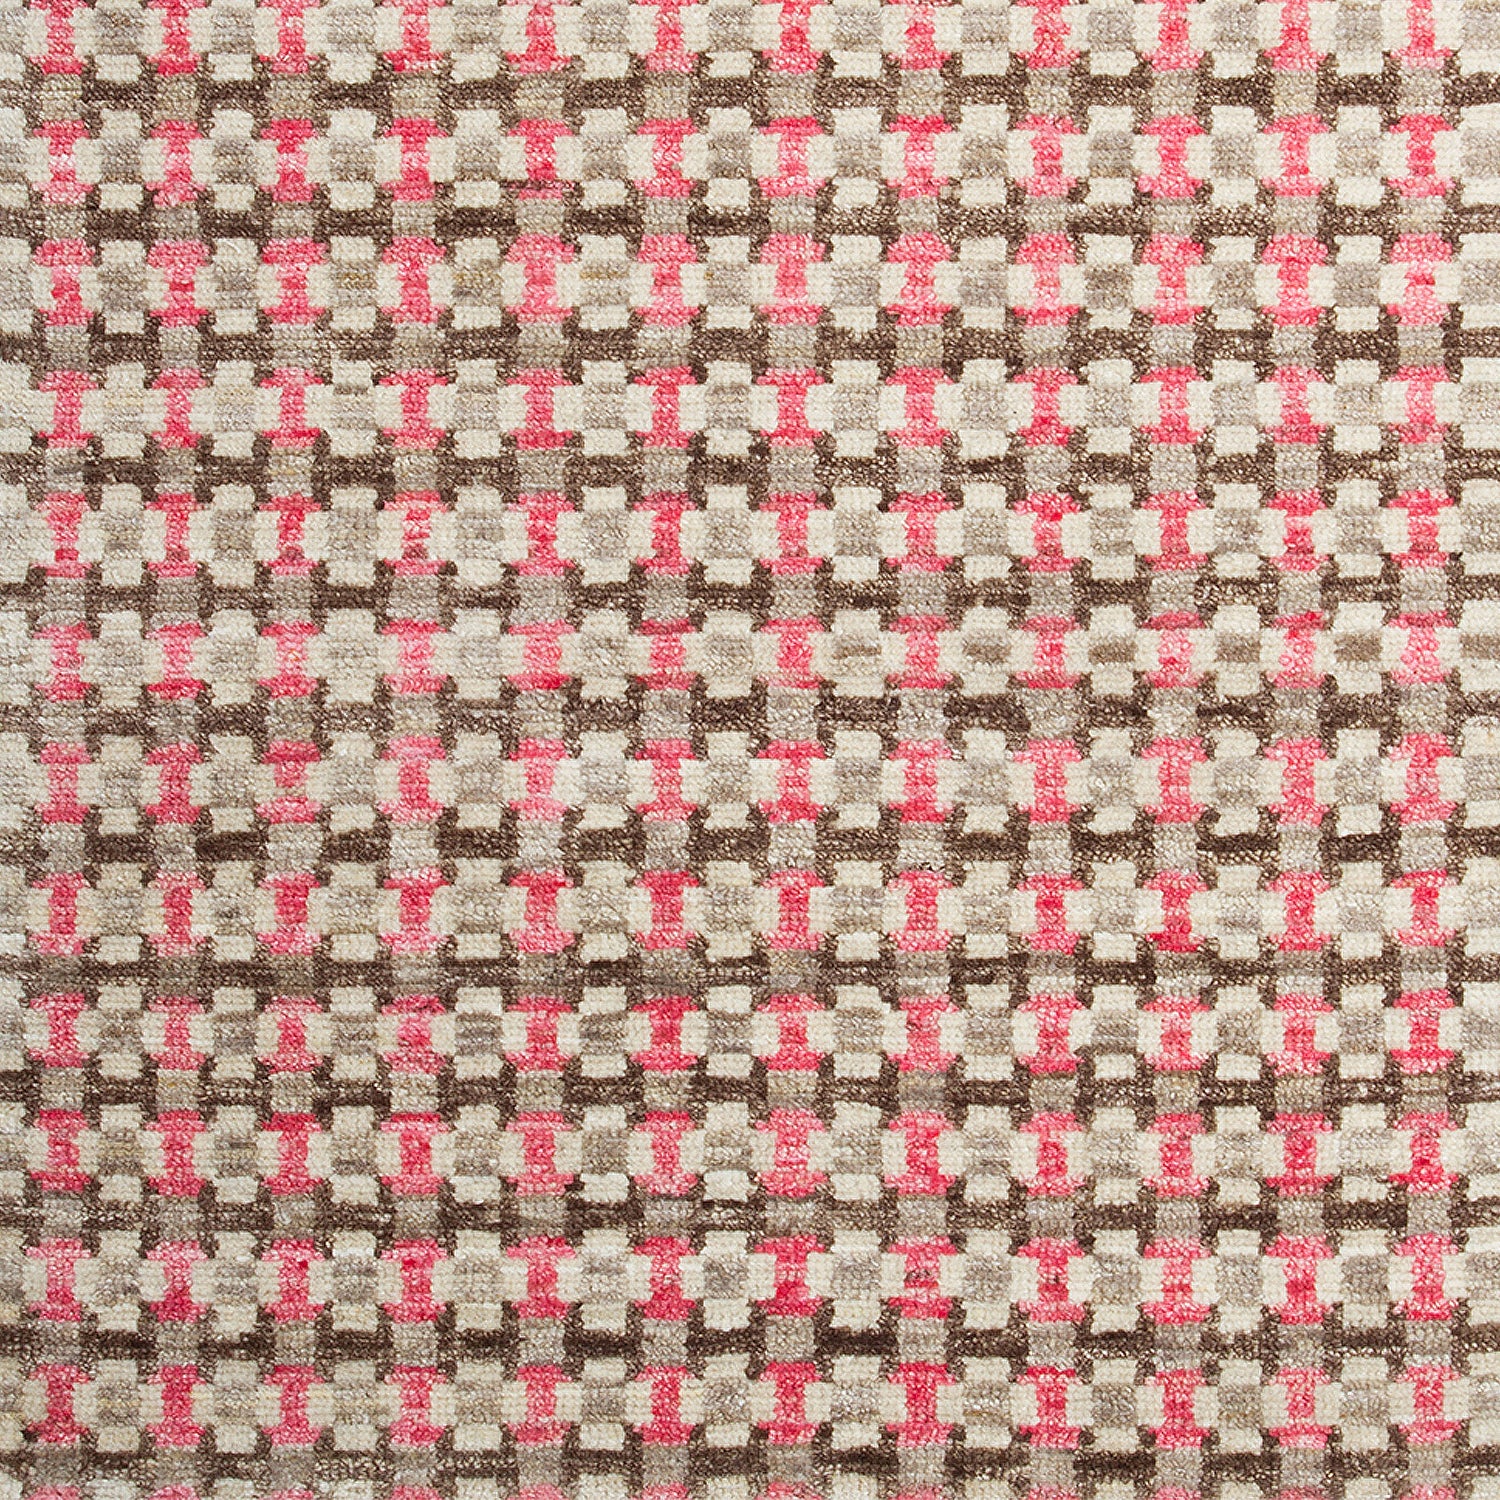 Woven rug swatch in a small-scale grid pattern featuring squares of white, pink, tan and brown.